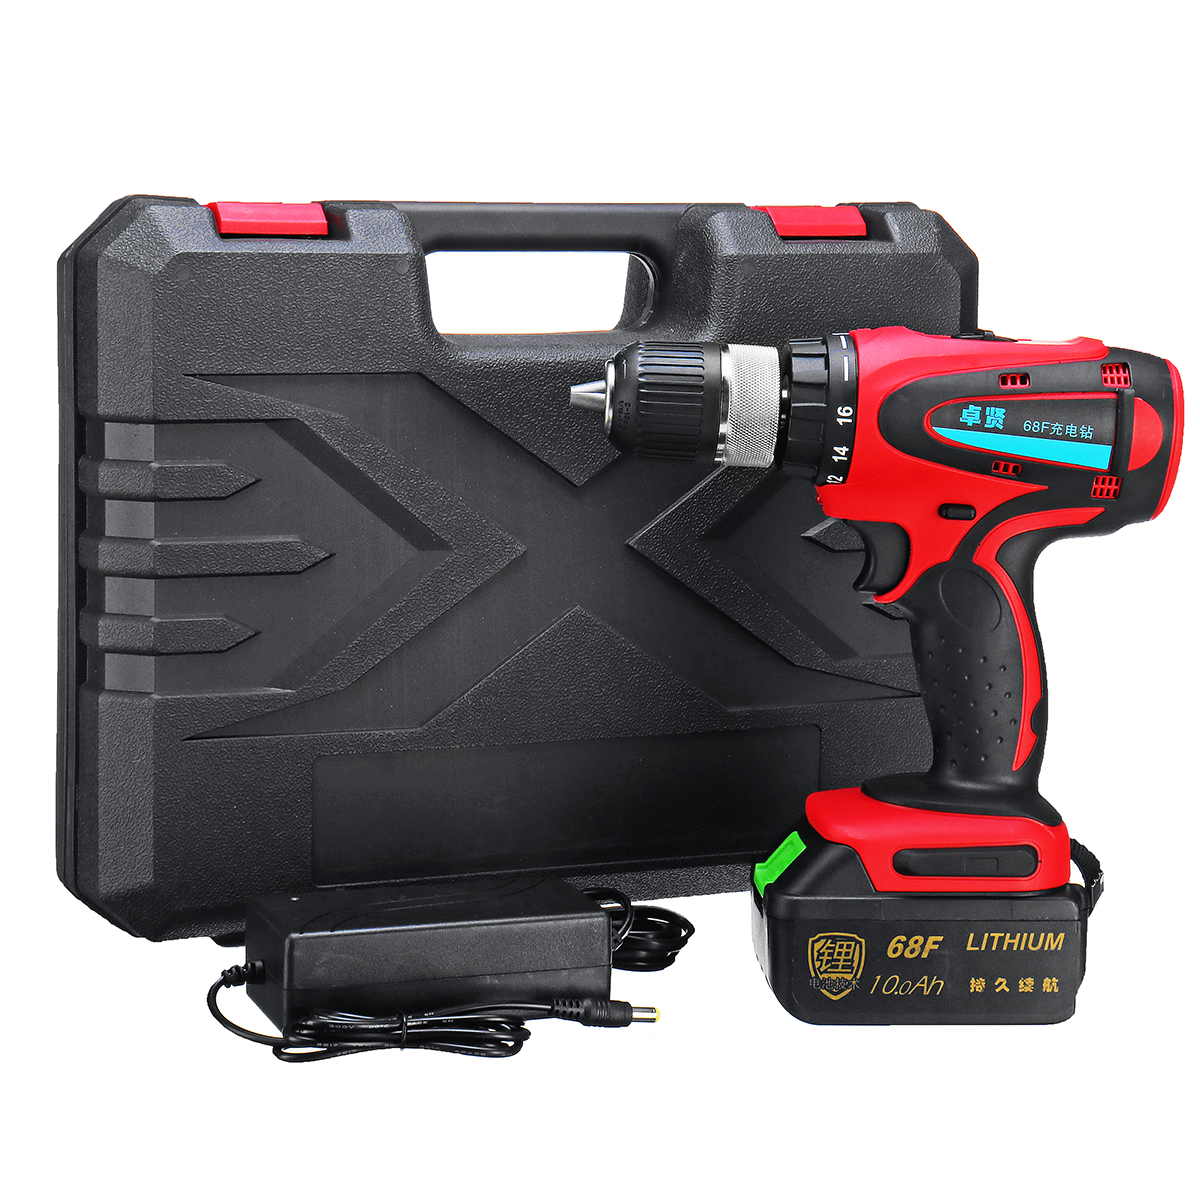 68V-10Ah-Cordless-Rechargeable-Electric-Drill-2-Speed-Heavy-Duty-Torque-Power-Drills-1403940-3